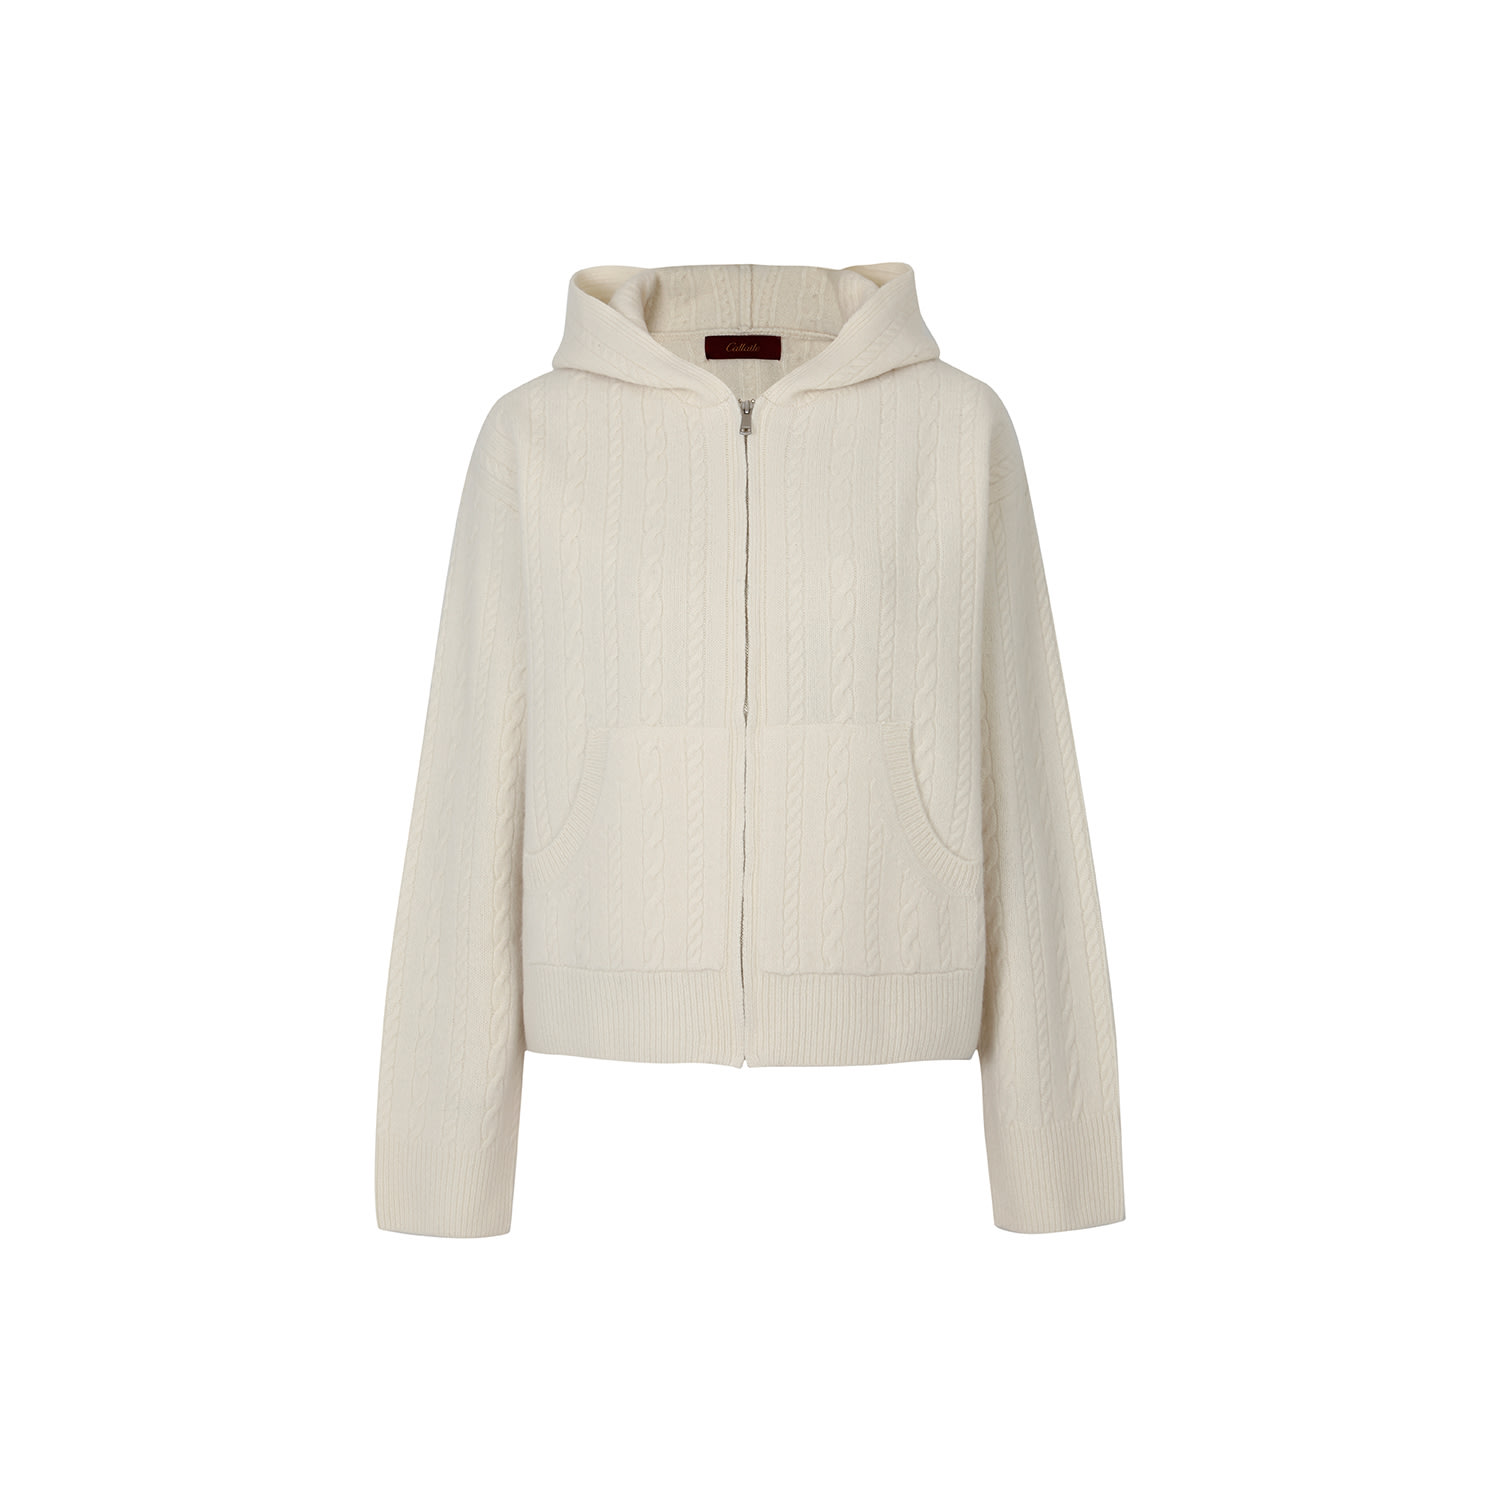 Women’s Neutrals Cashmere Blend Cable Hooded Zip Up Jumper-Ivory S/M Callaite